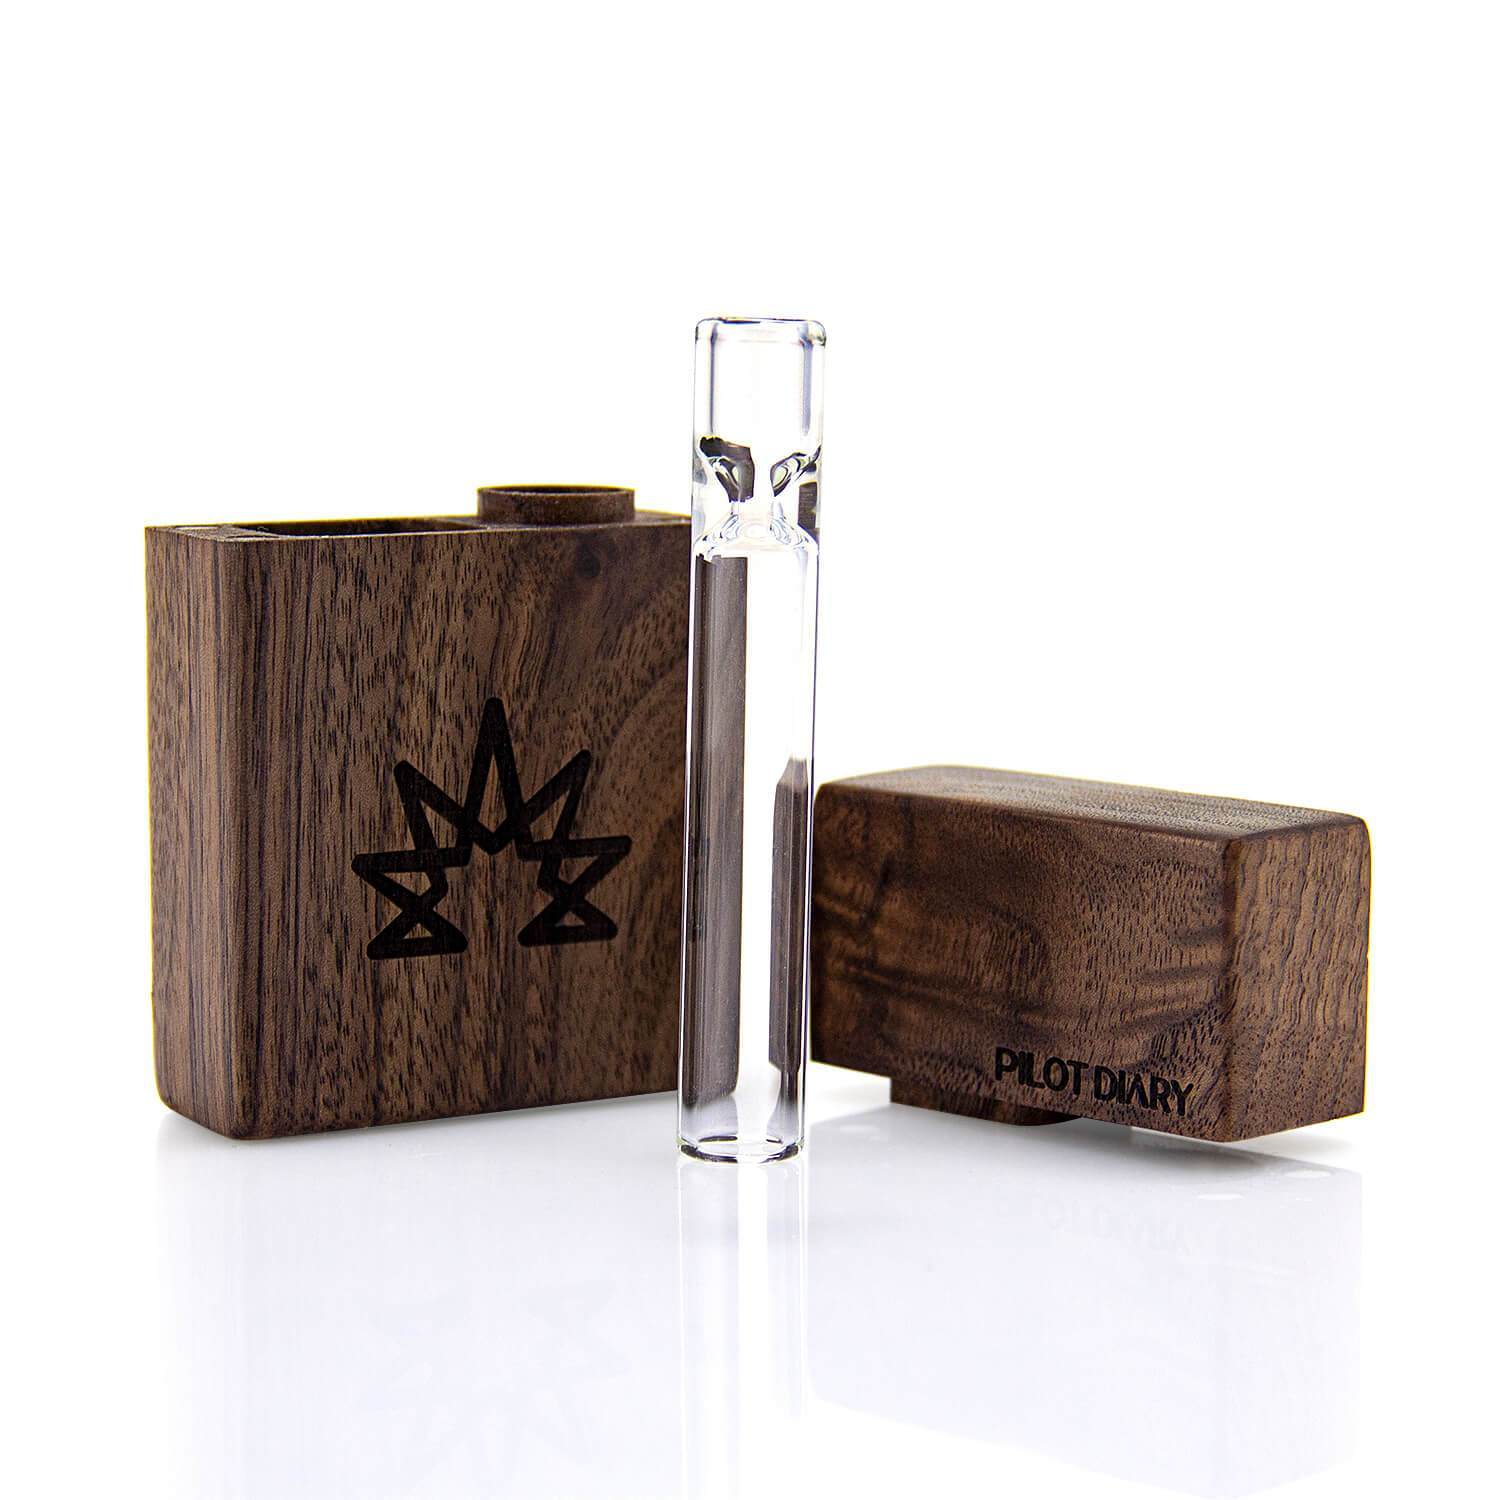 Wood Dugout With Glass One Hitter - PILOT DIARY